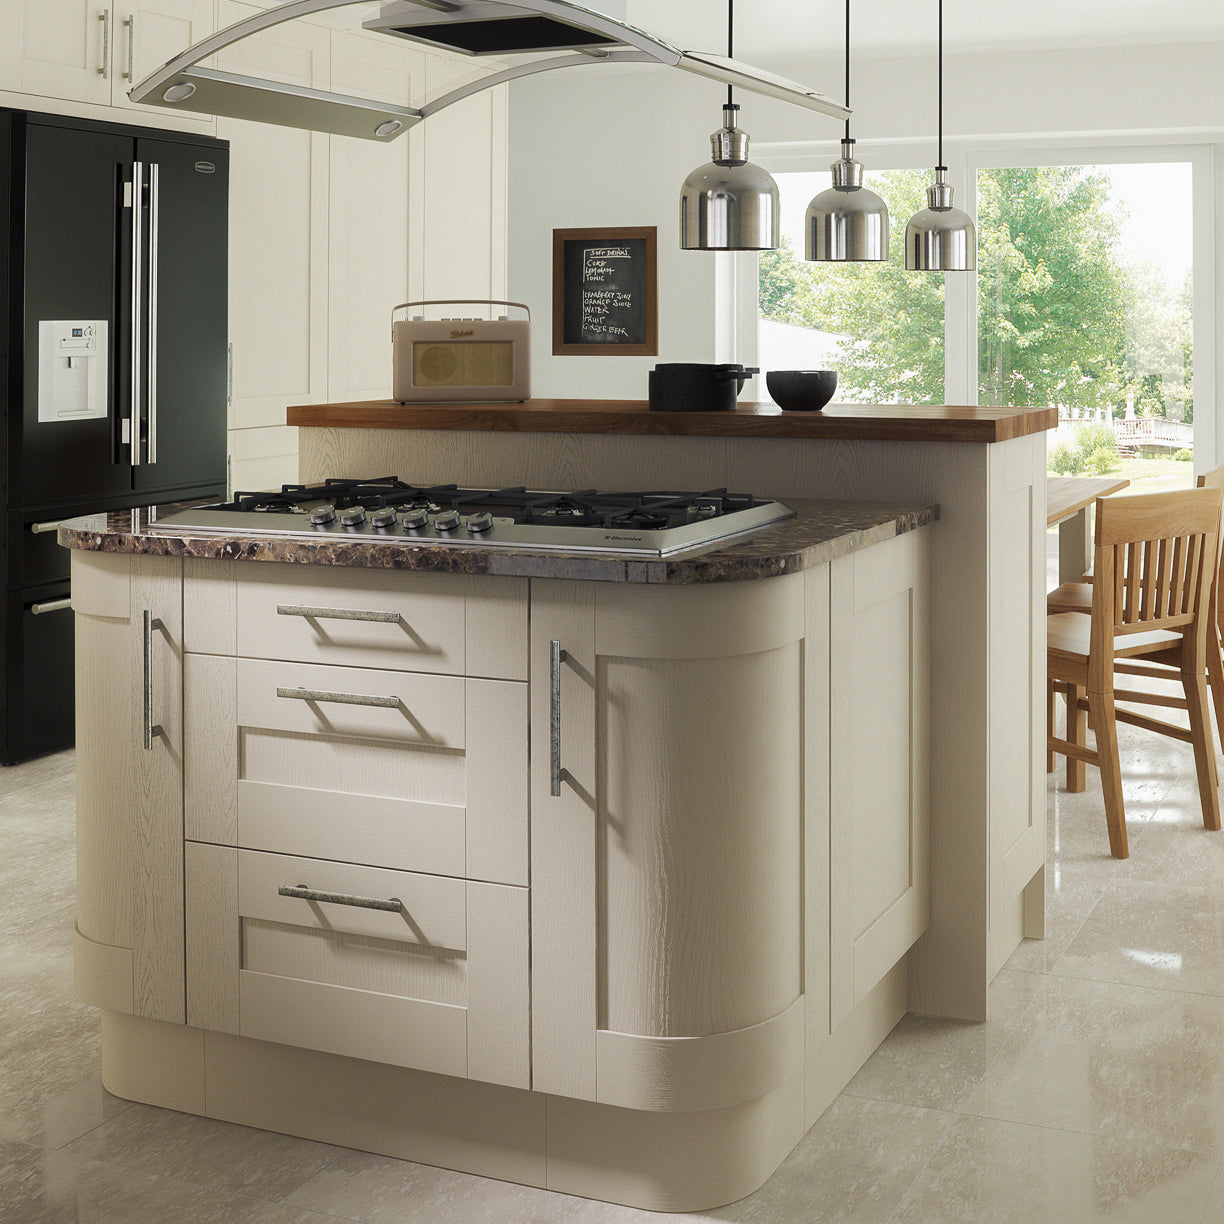 What To Do When Kitchen Doors, Plinths, Drawers And Side Panels Are Discontinued